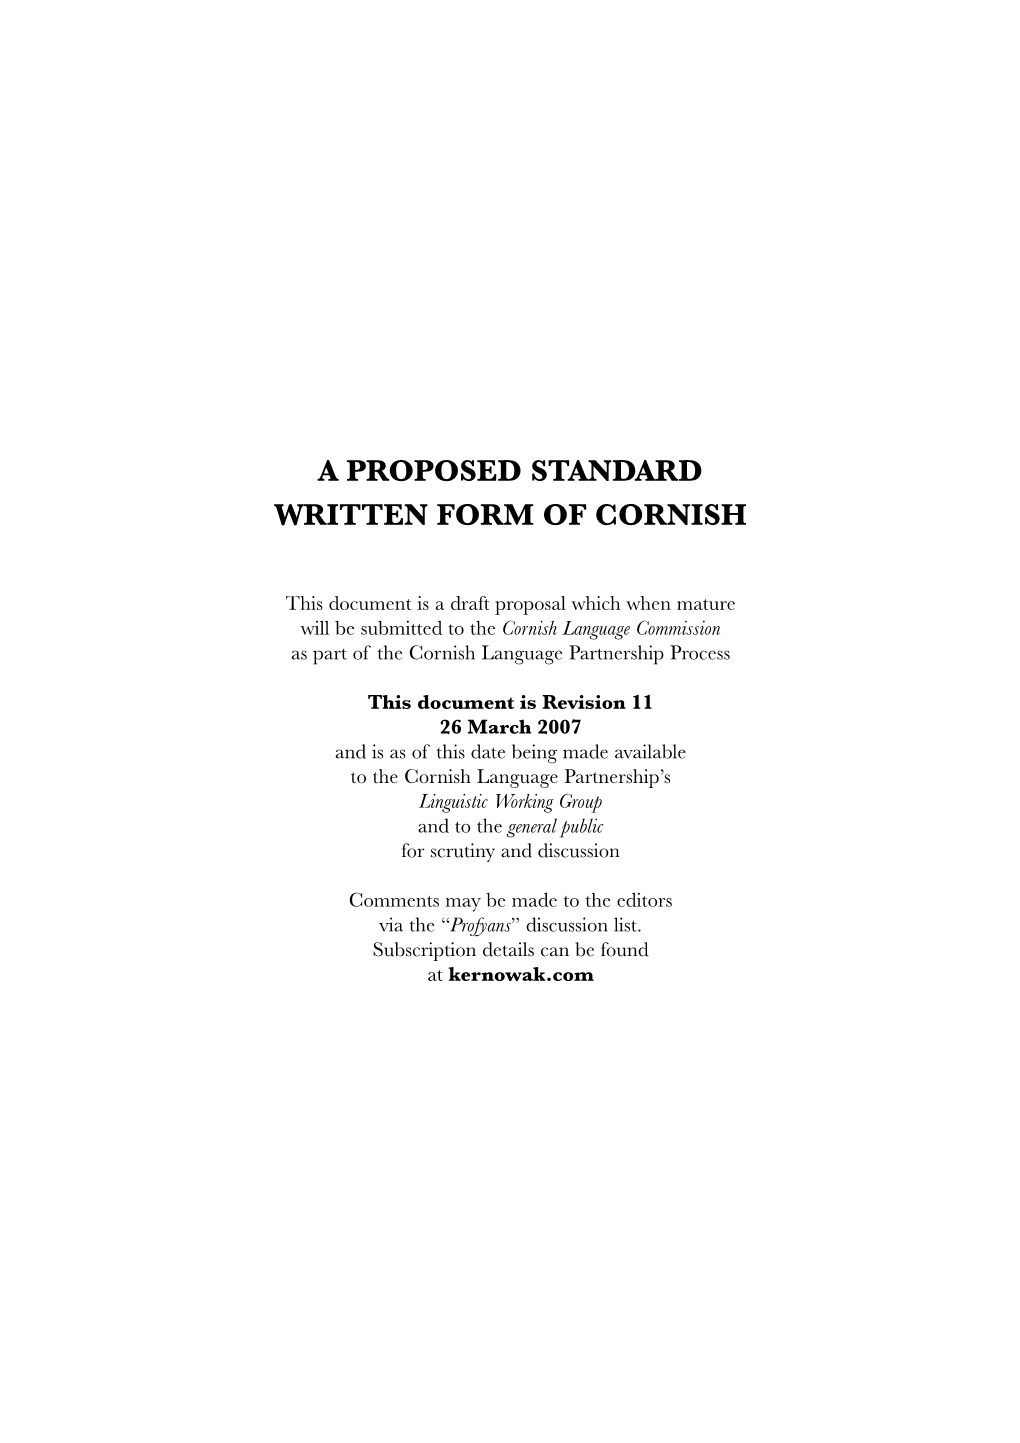 A Proposed Standard Written Form of Cornish